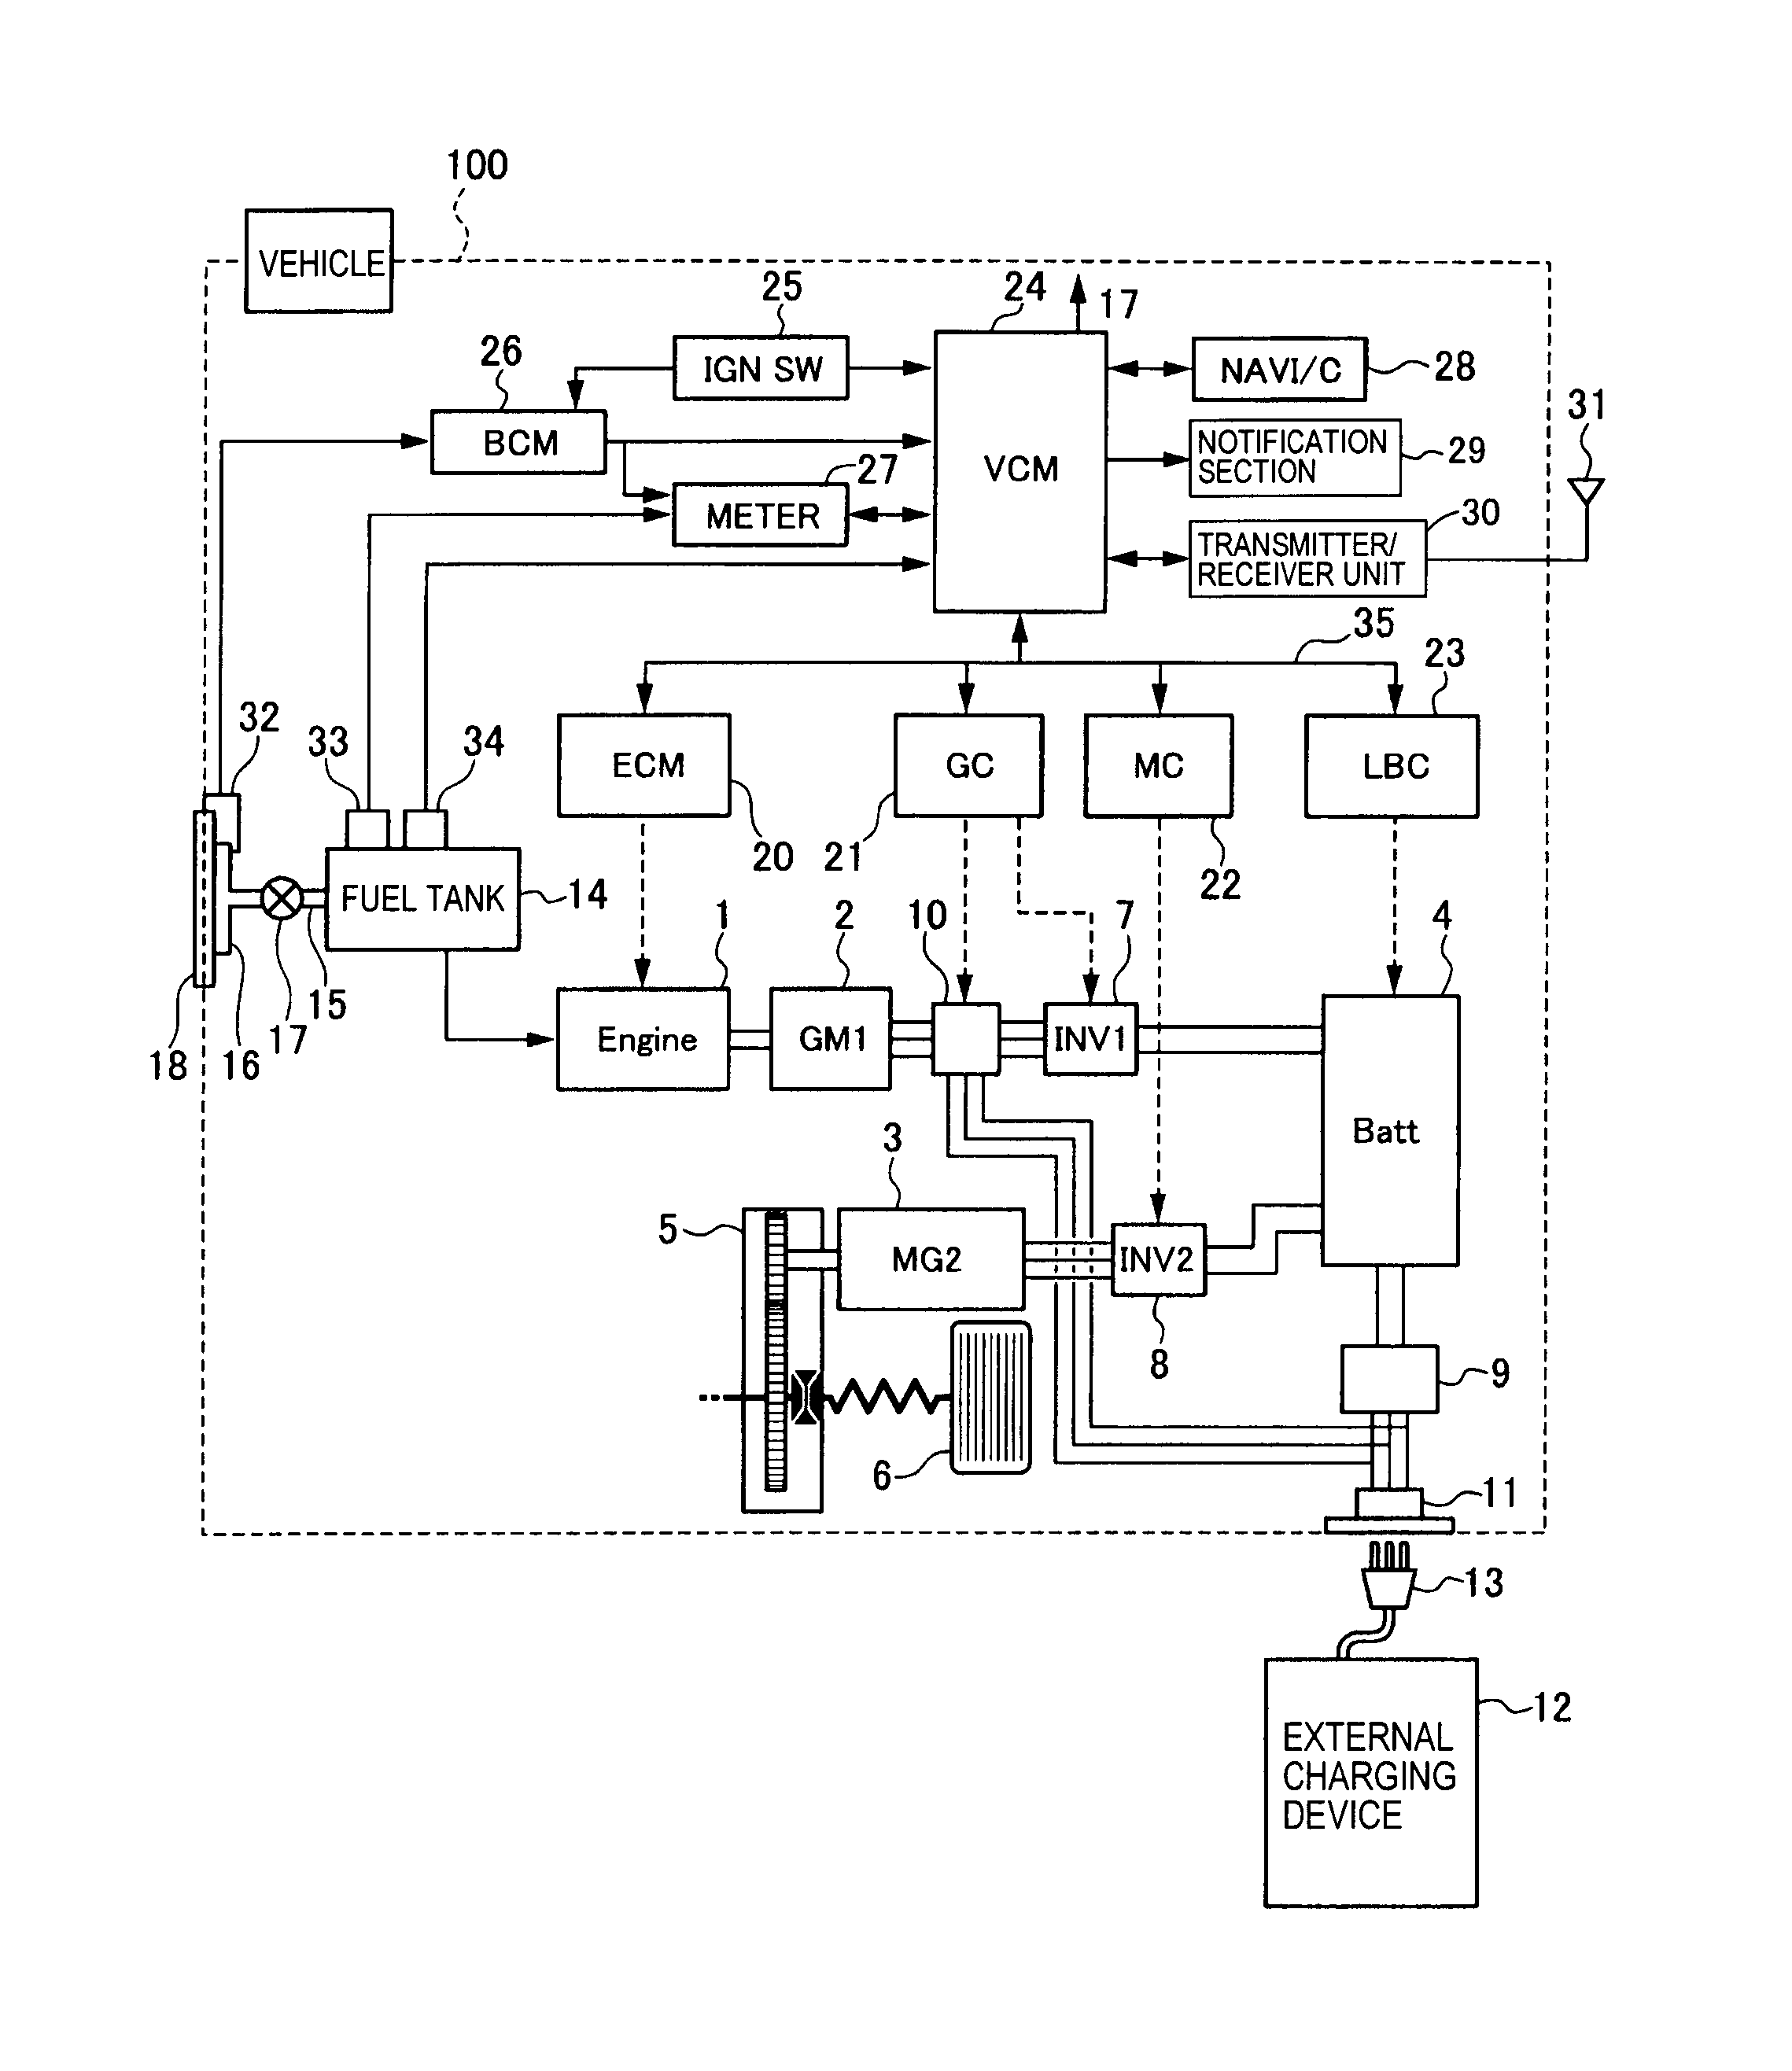 clarion vrx775vd wiring diagram